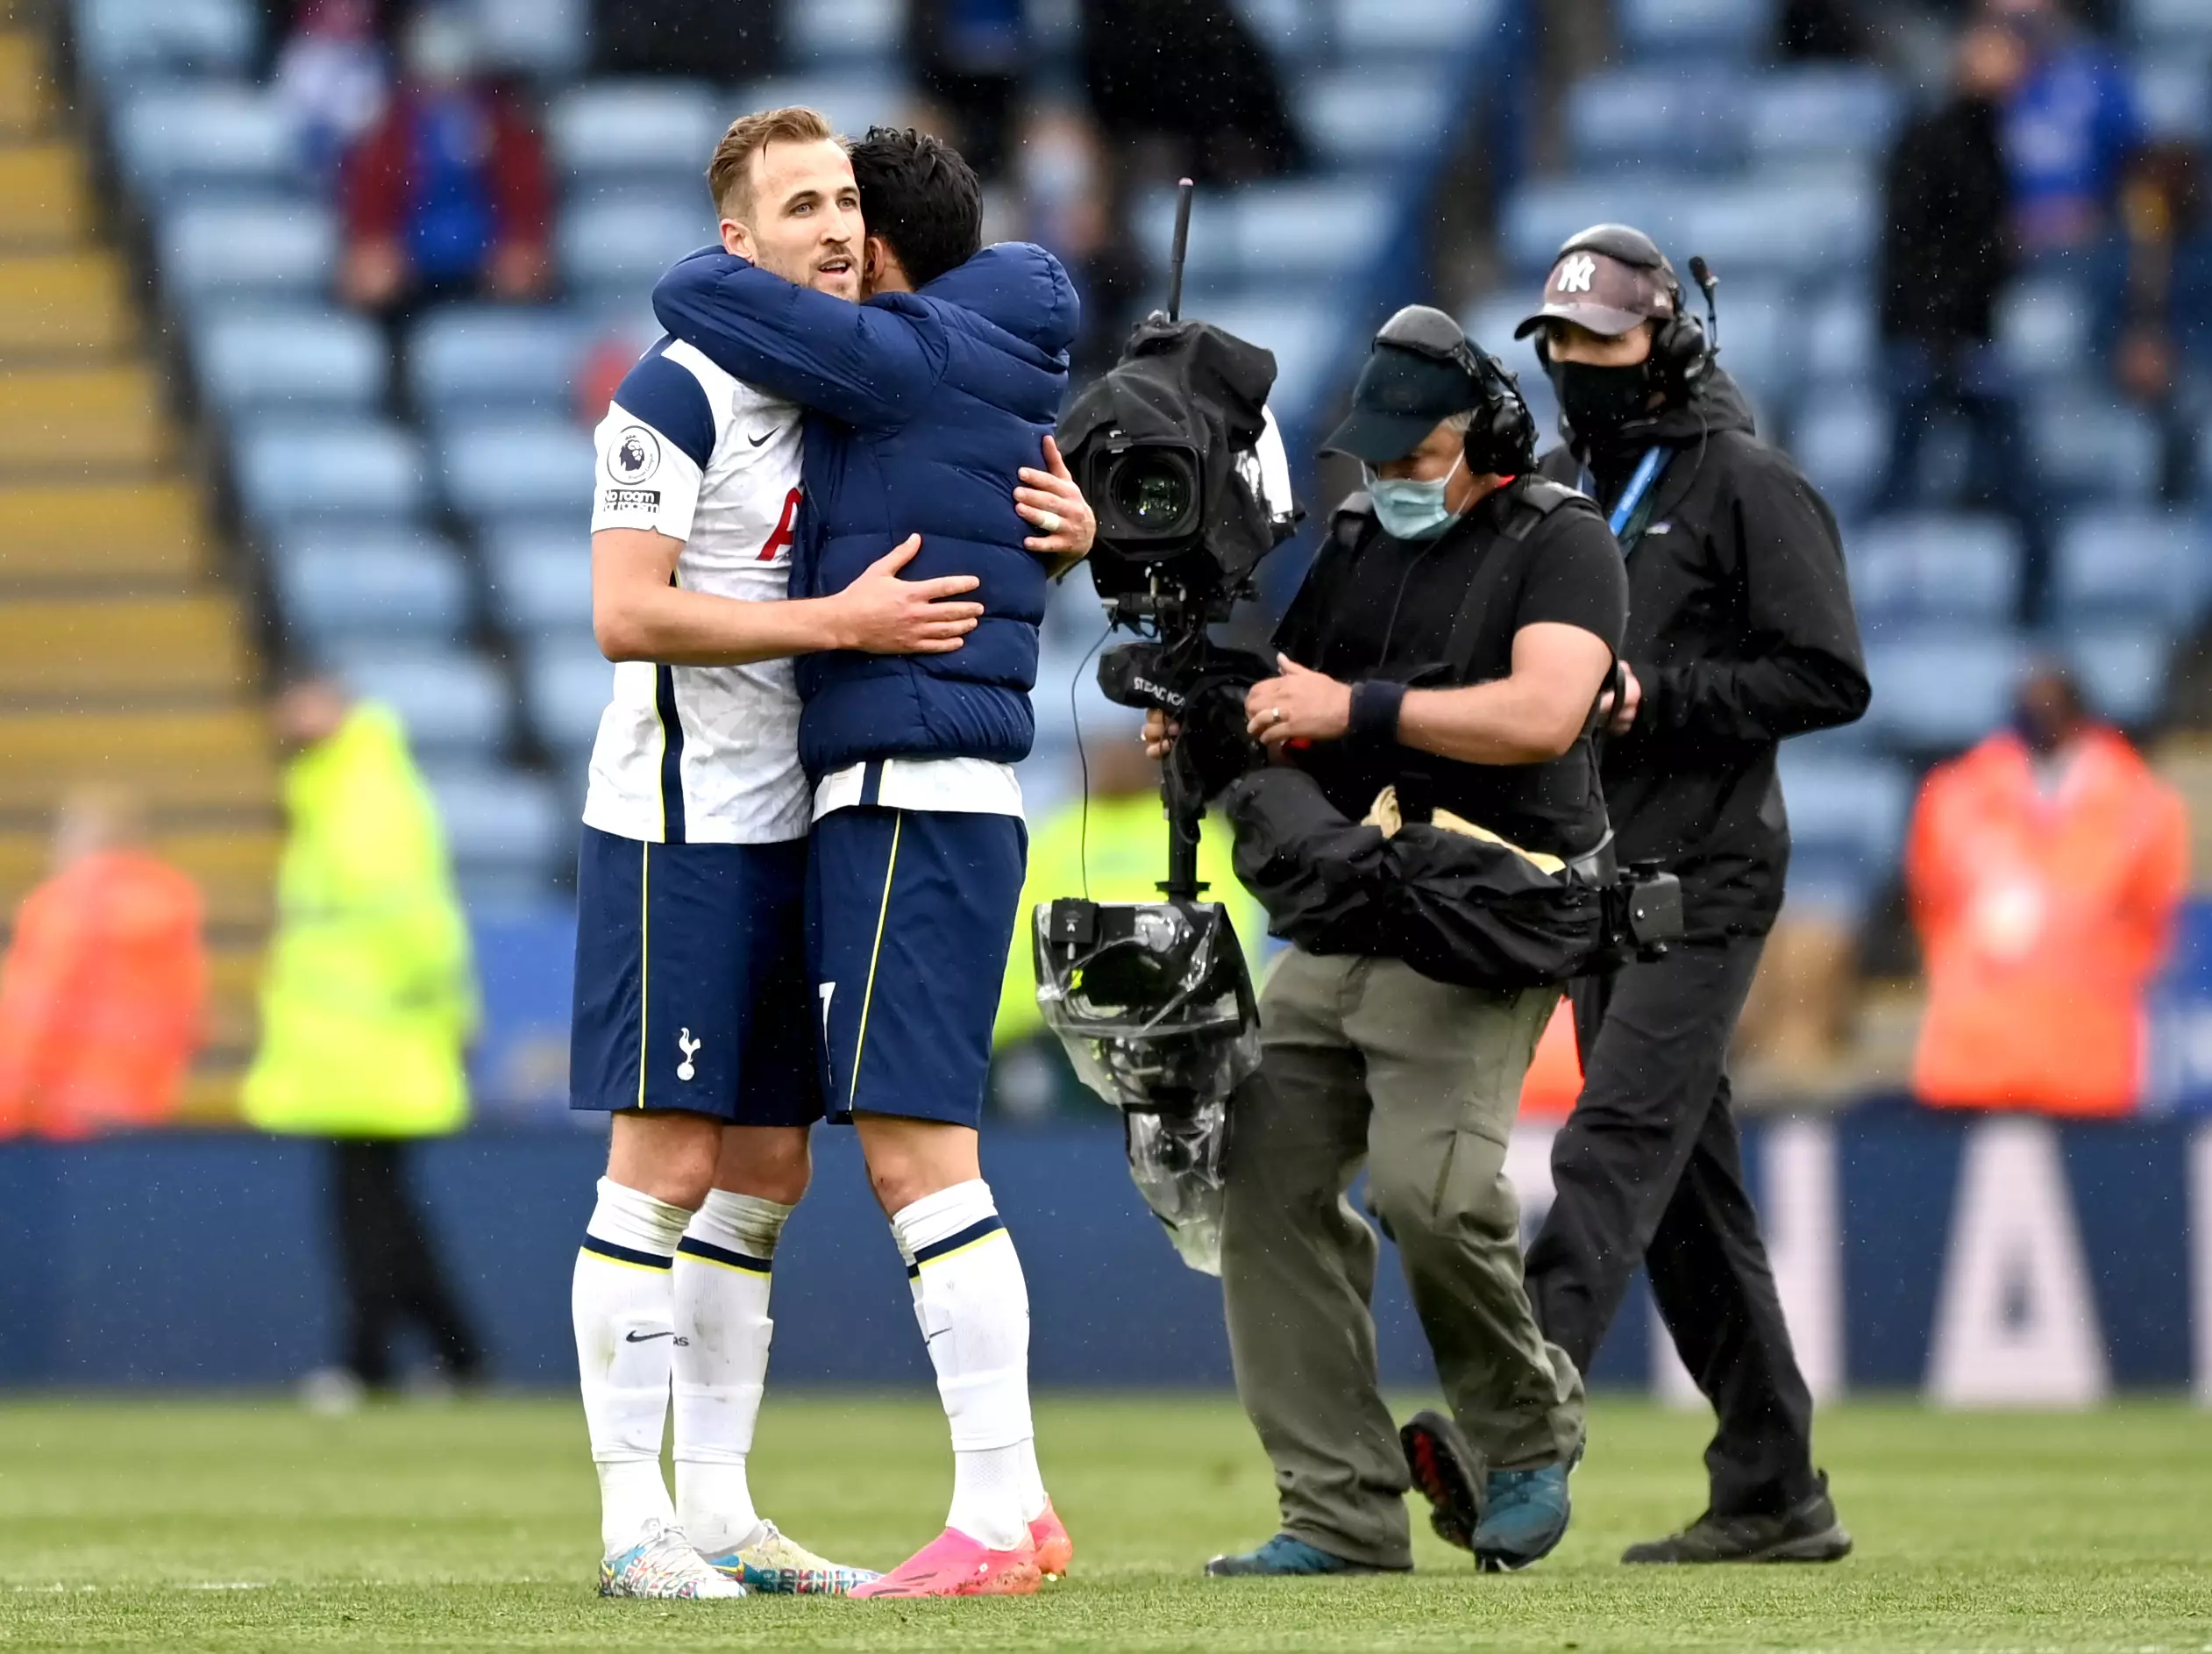 It looked like Harry Kane was saying goodbye to his Tottenham teammates on the final day of the season. Image: PA Images